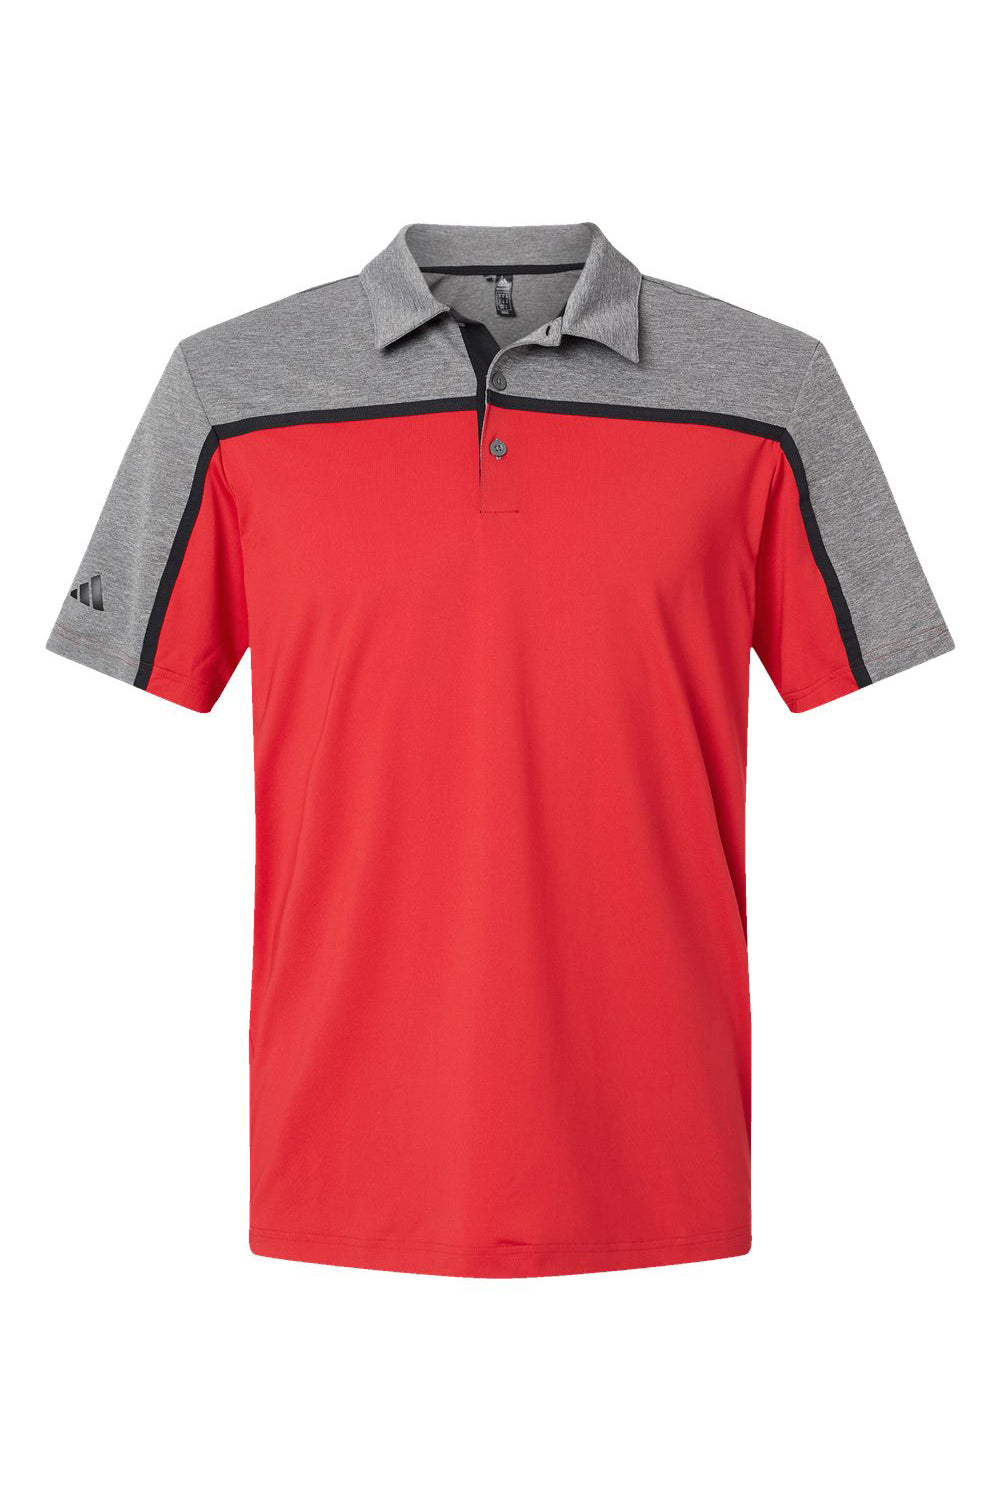 Adidas A512 Mens Ultimate Colorblock Moisture Wicking Short Sleeve Polo Shirt Collegiate Red/Black/Grey Melange Flat Front